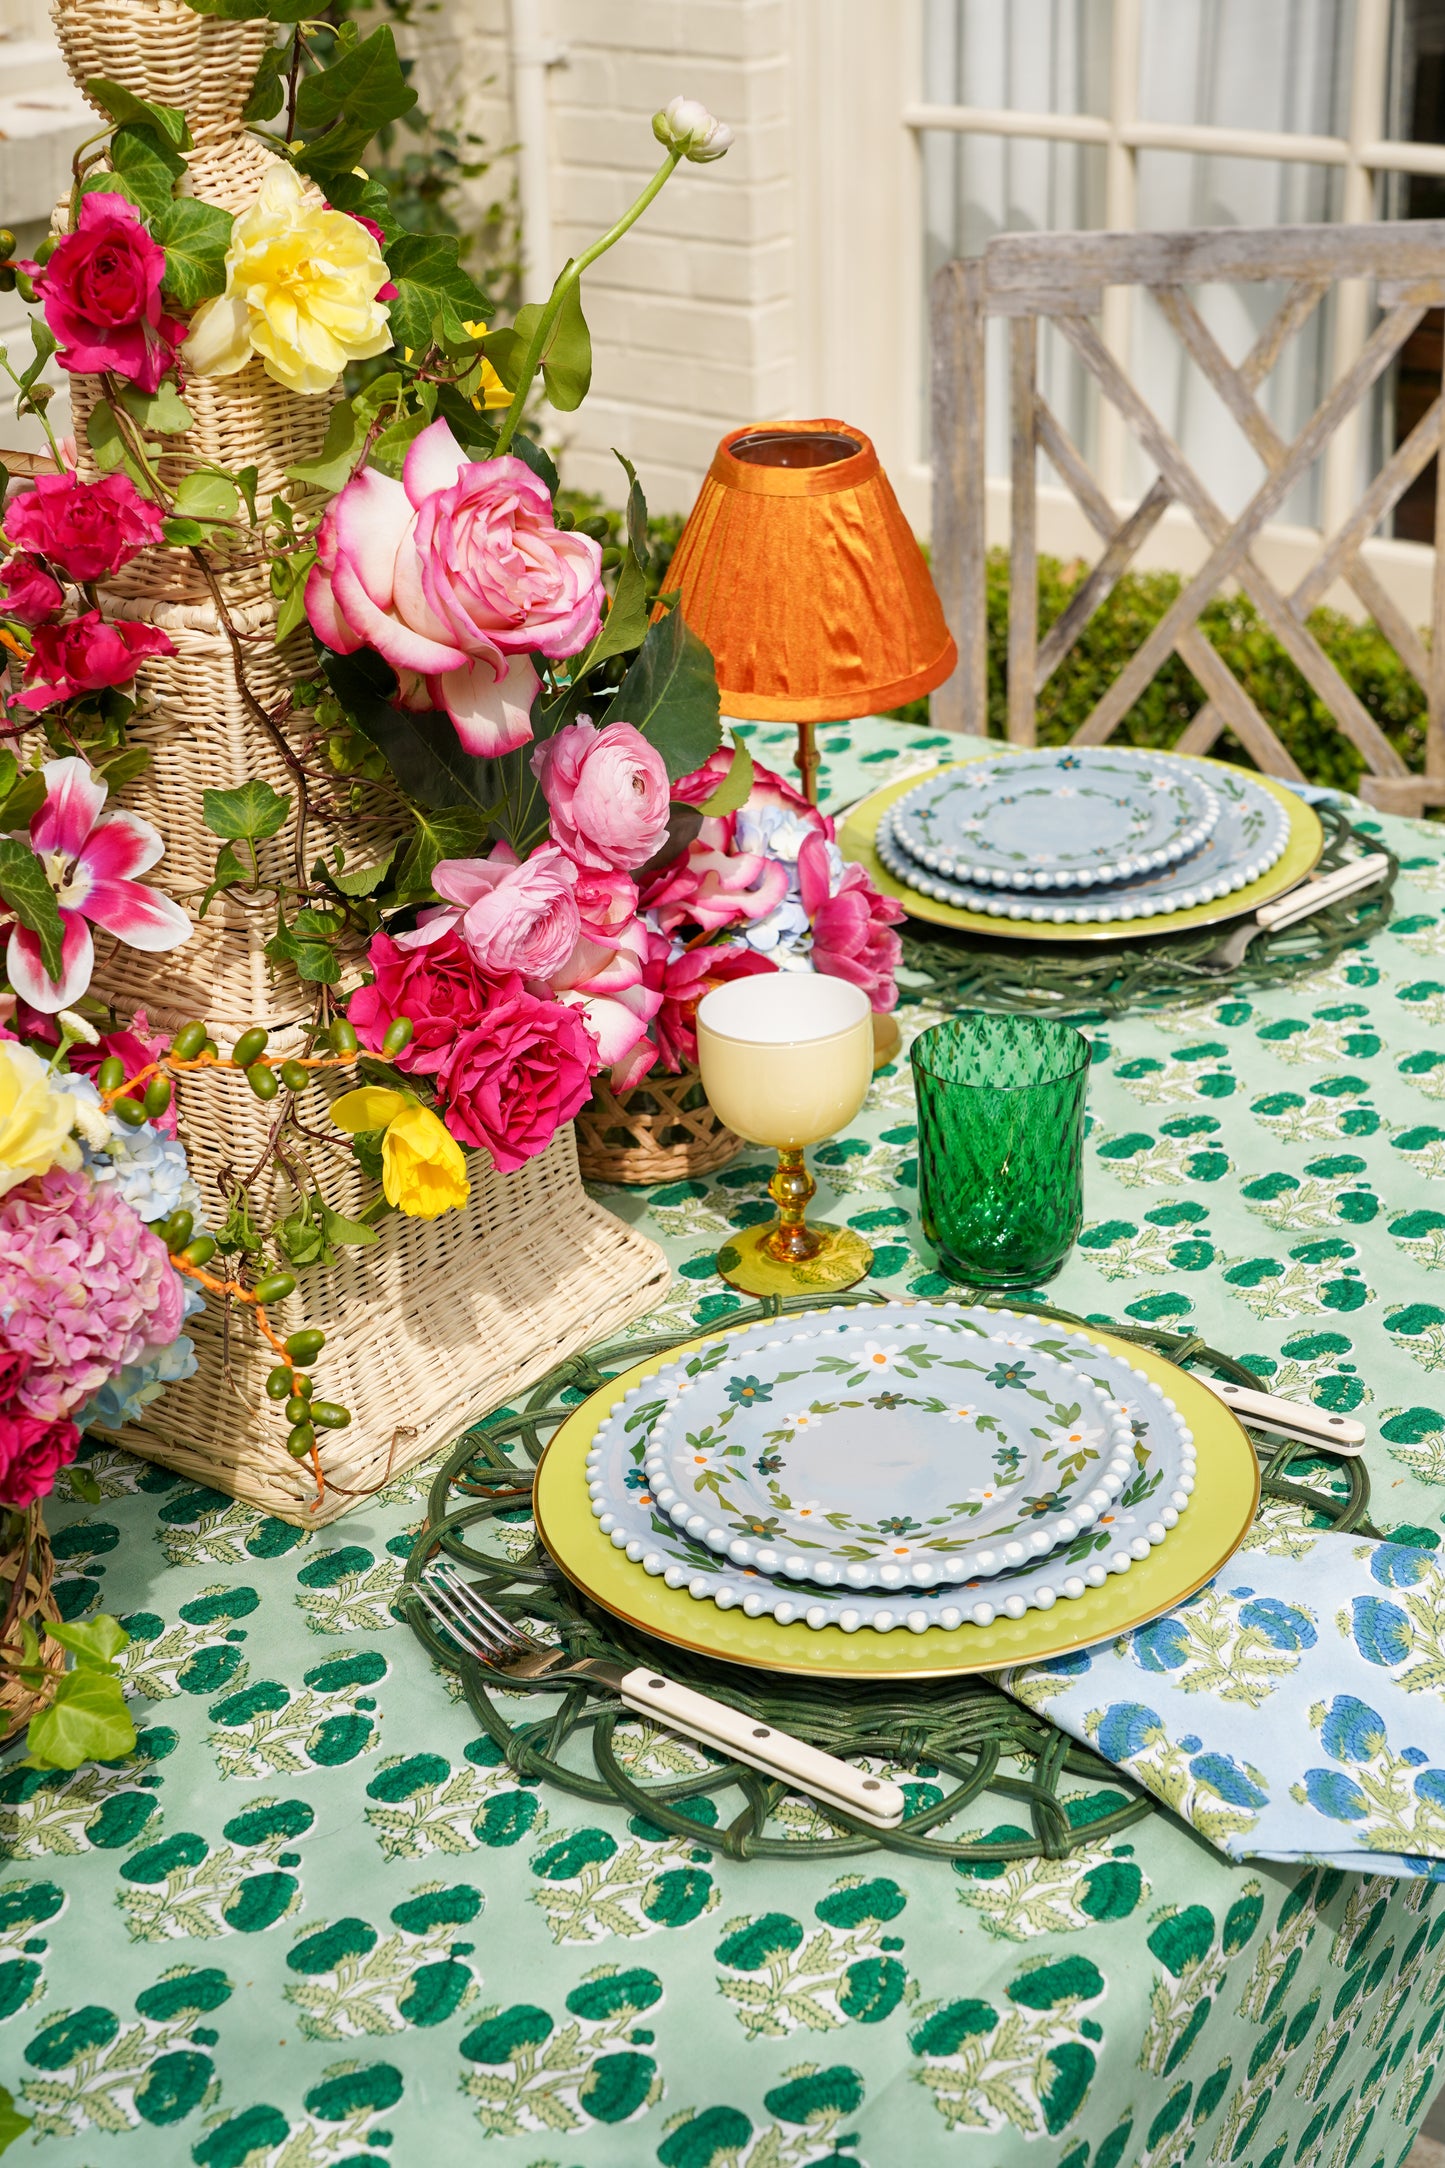 Poms Tablecloth in Emerald Green